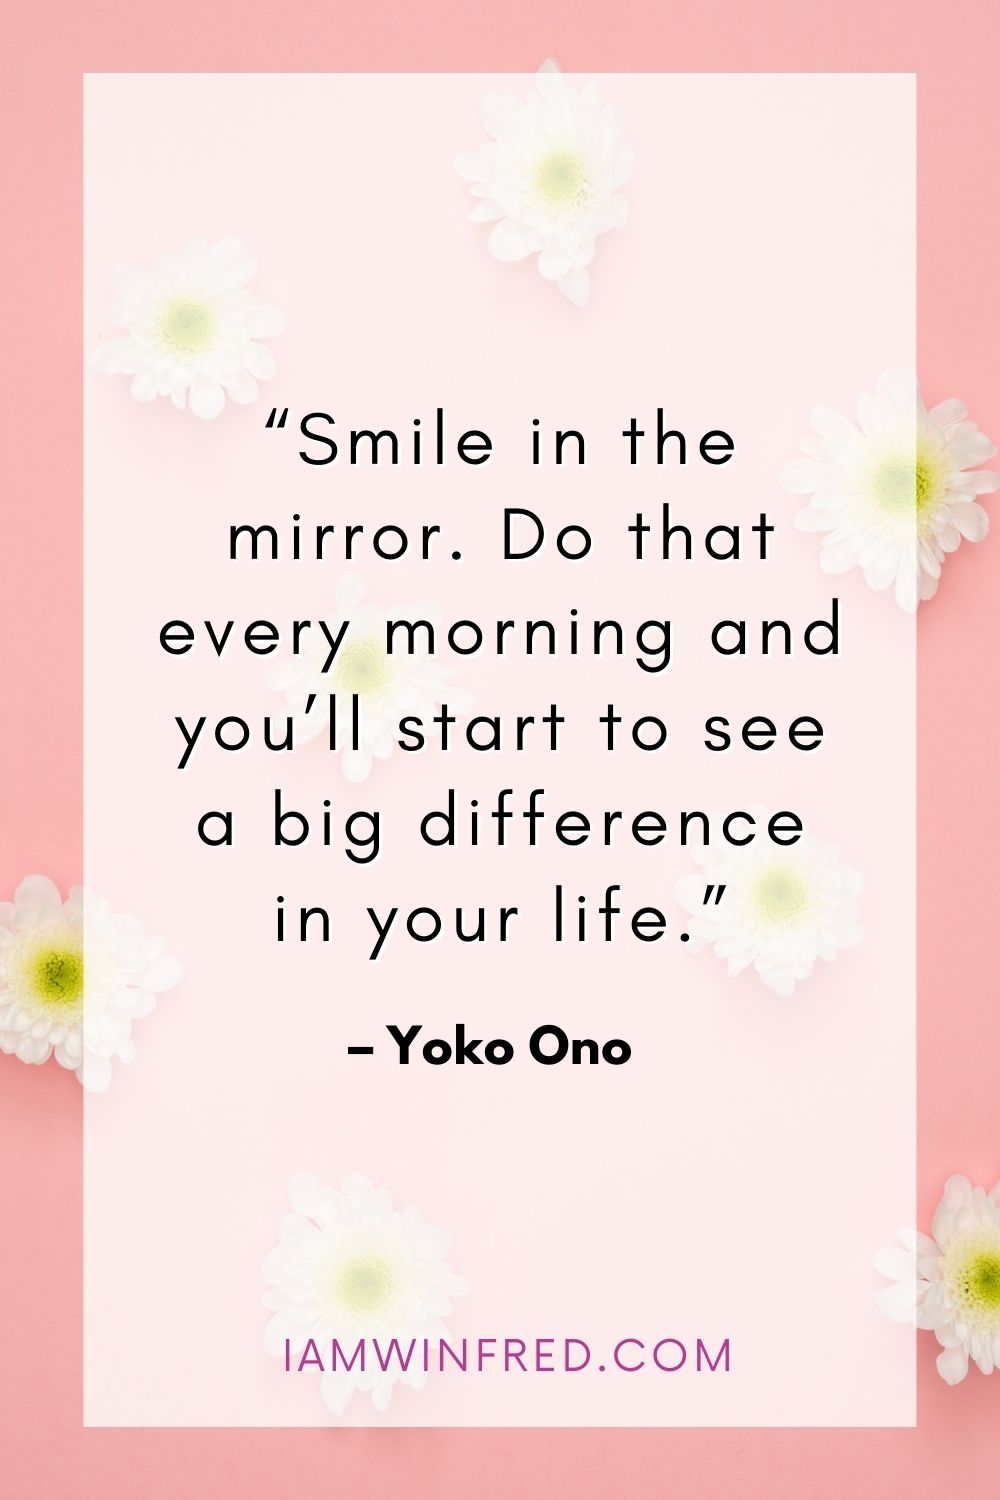 Smile In The Mirror. Do That Every Morning And Youll Start To See A Big Difference In Your Life.